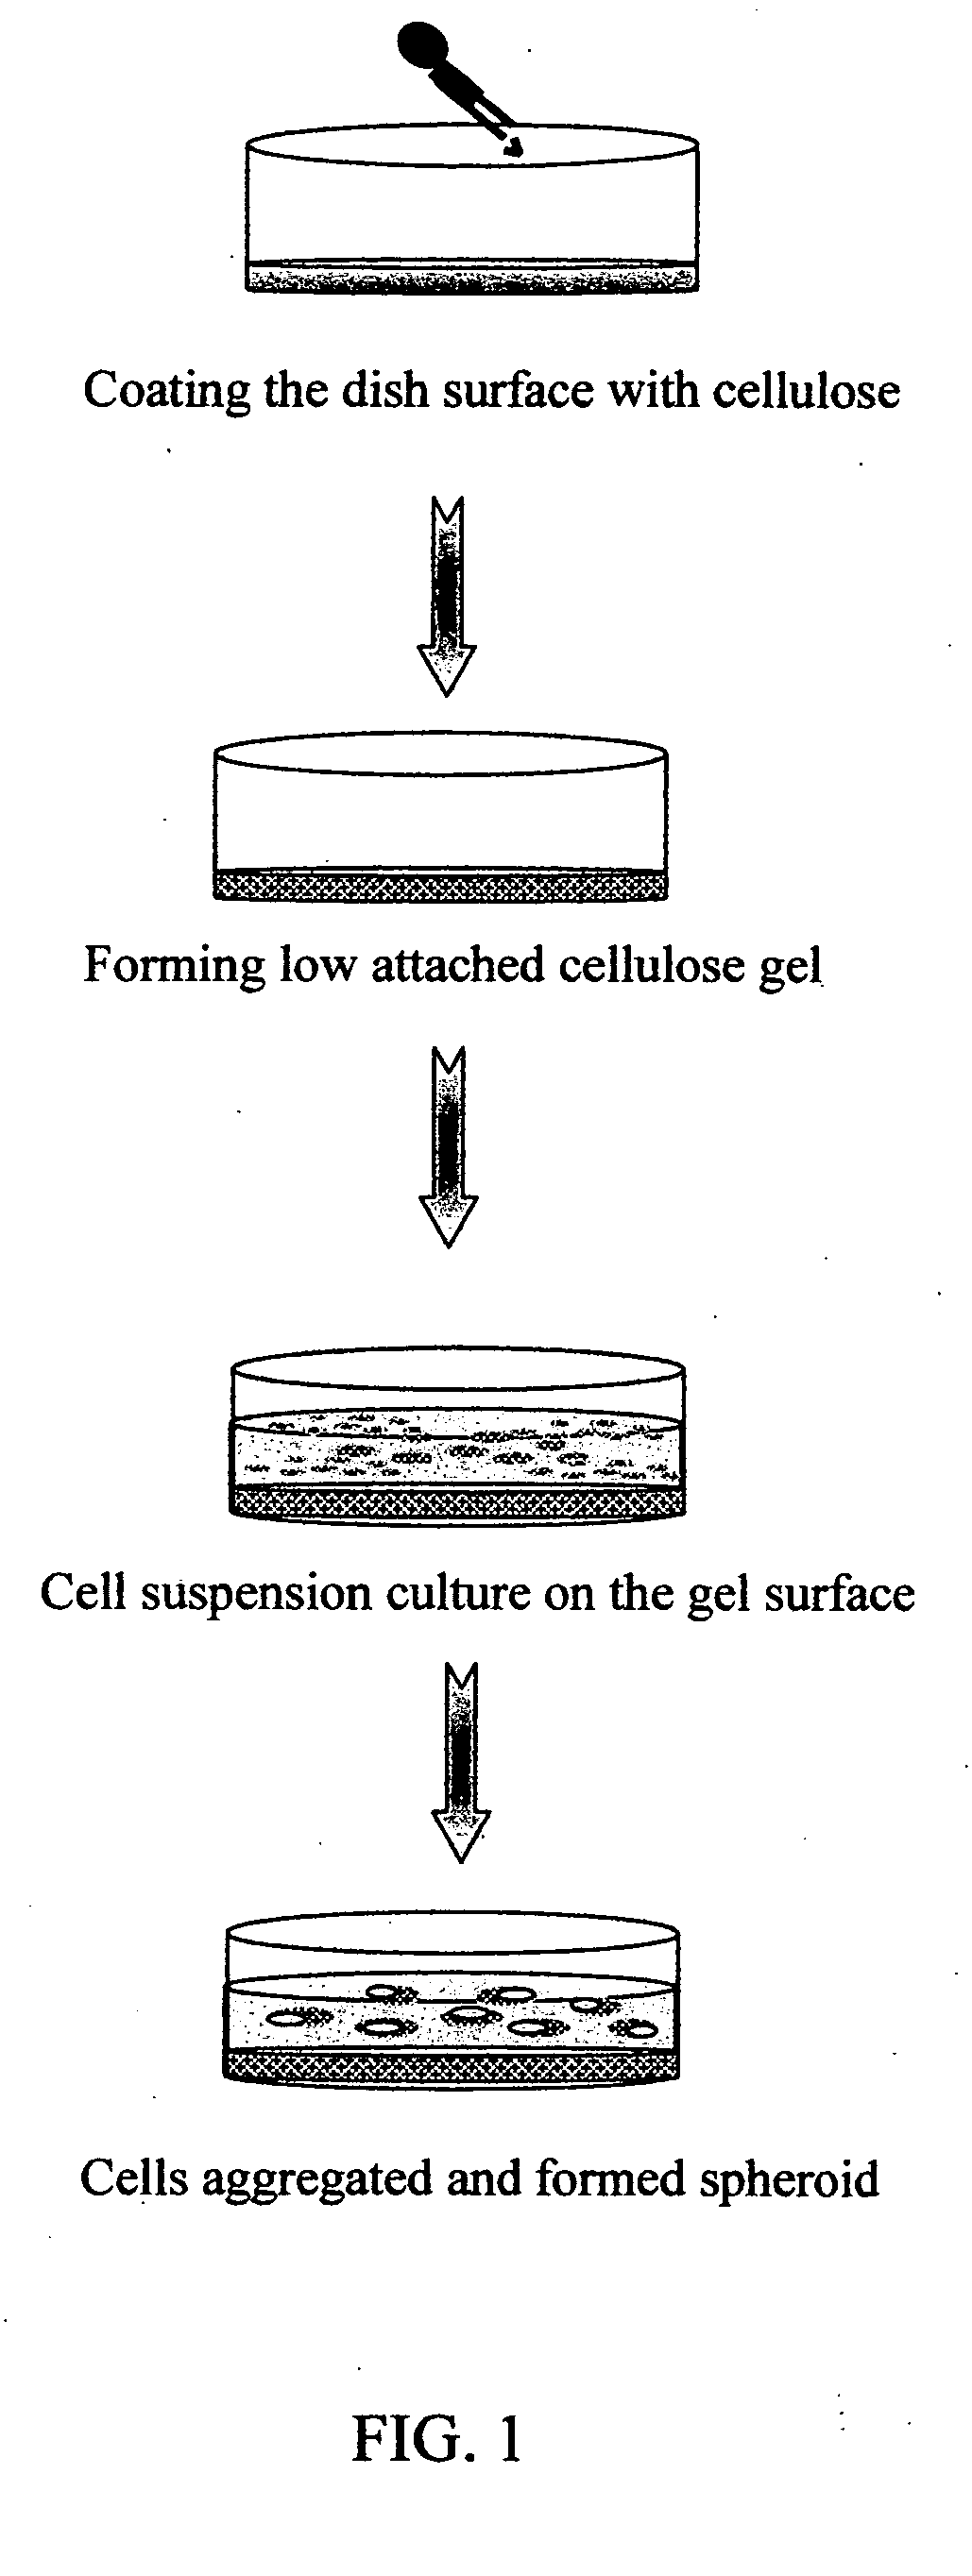 Method of forming multicellular spheroids from the cultured cells